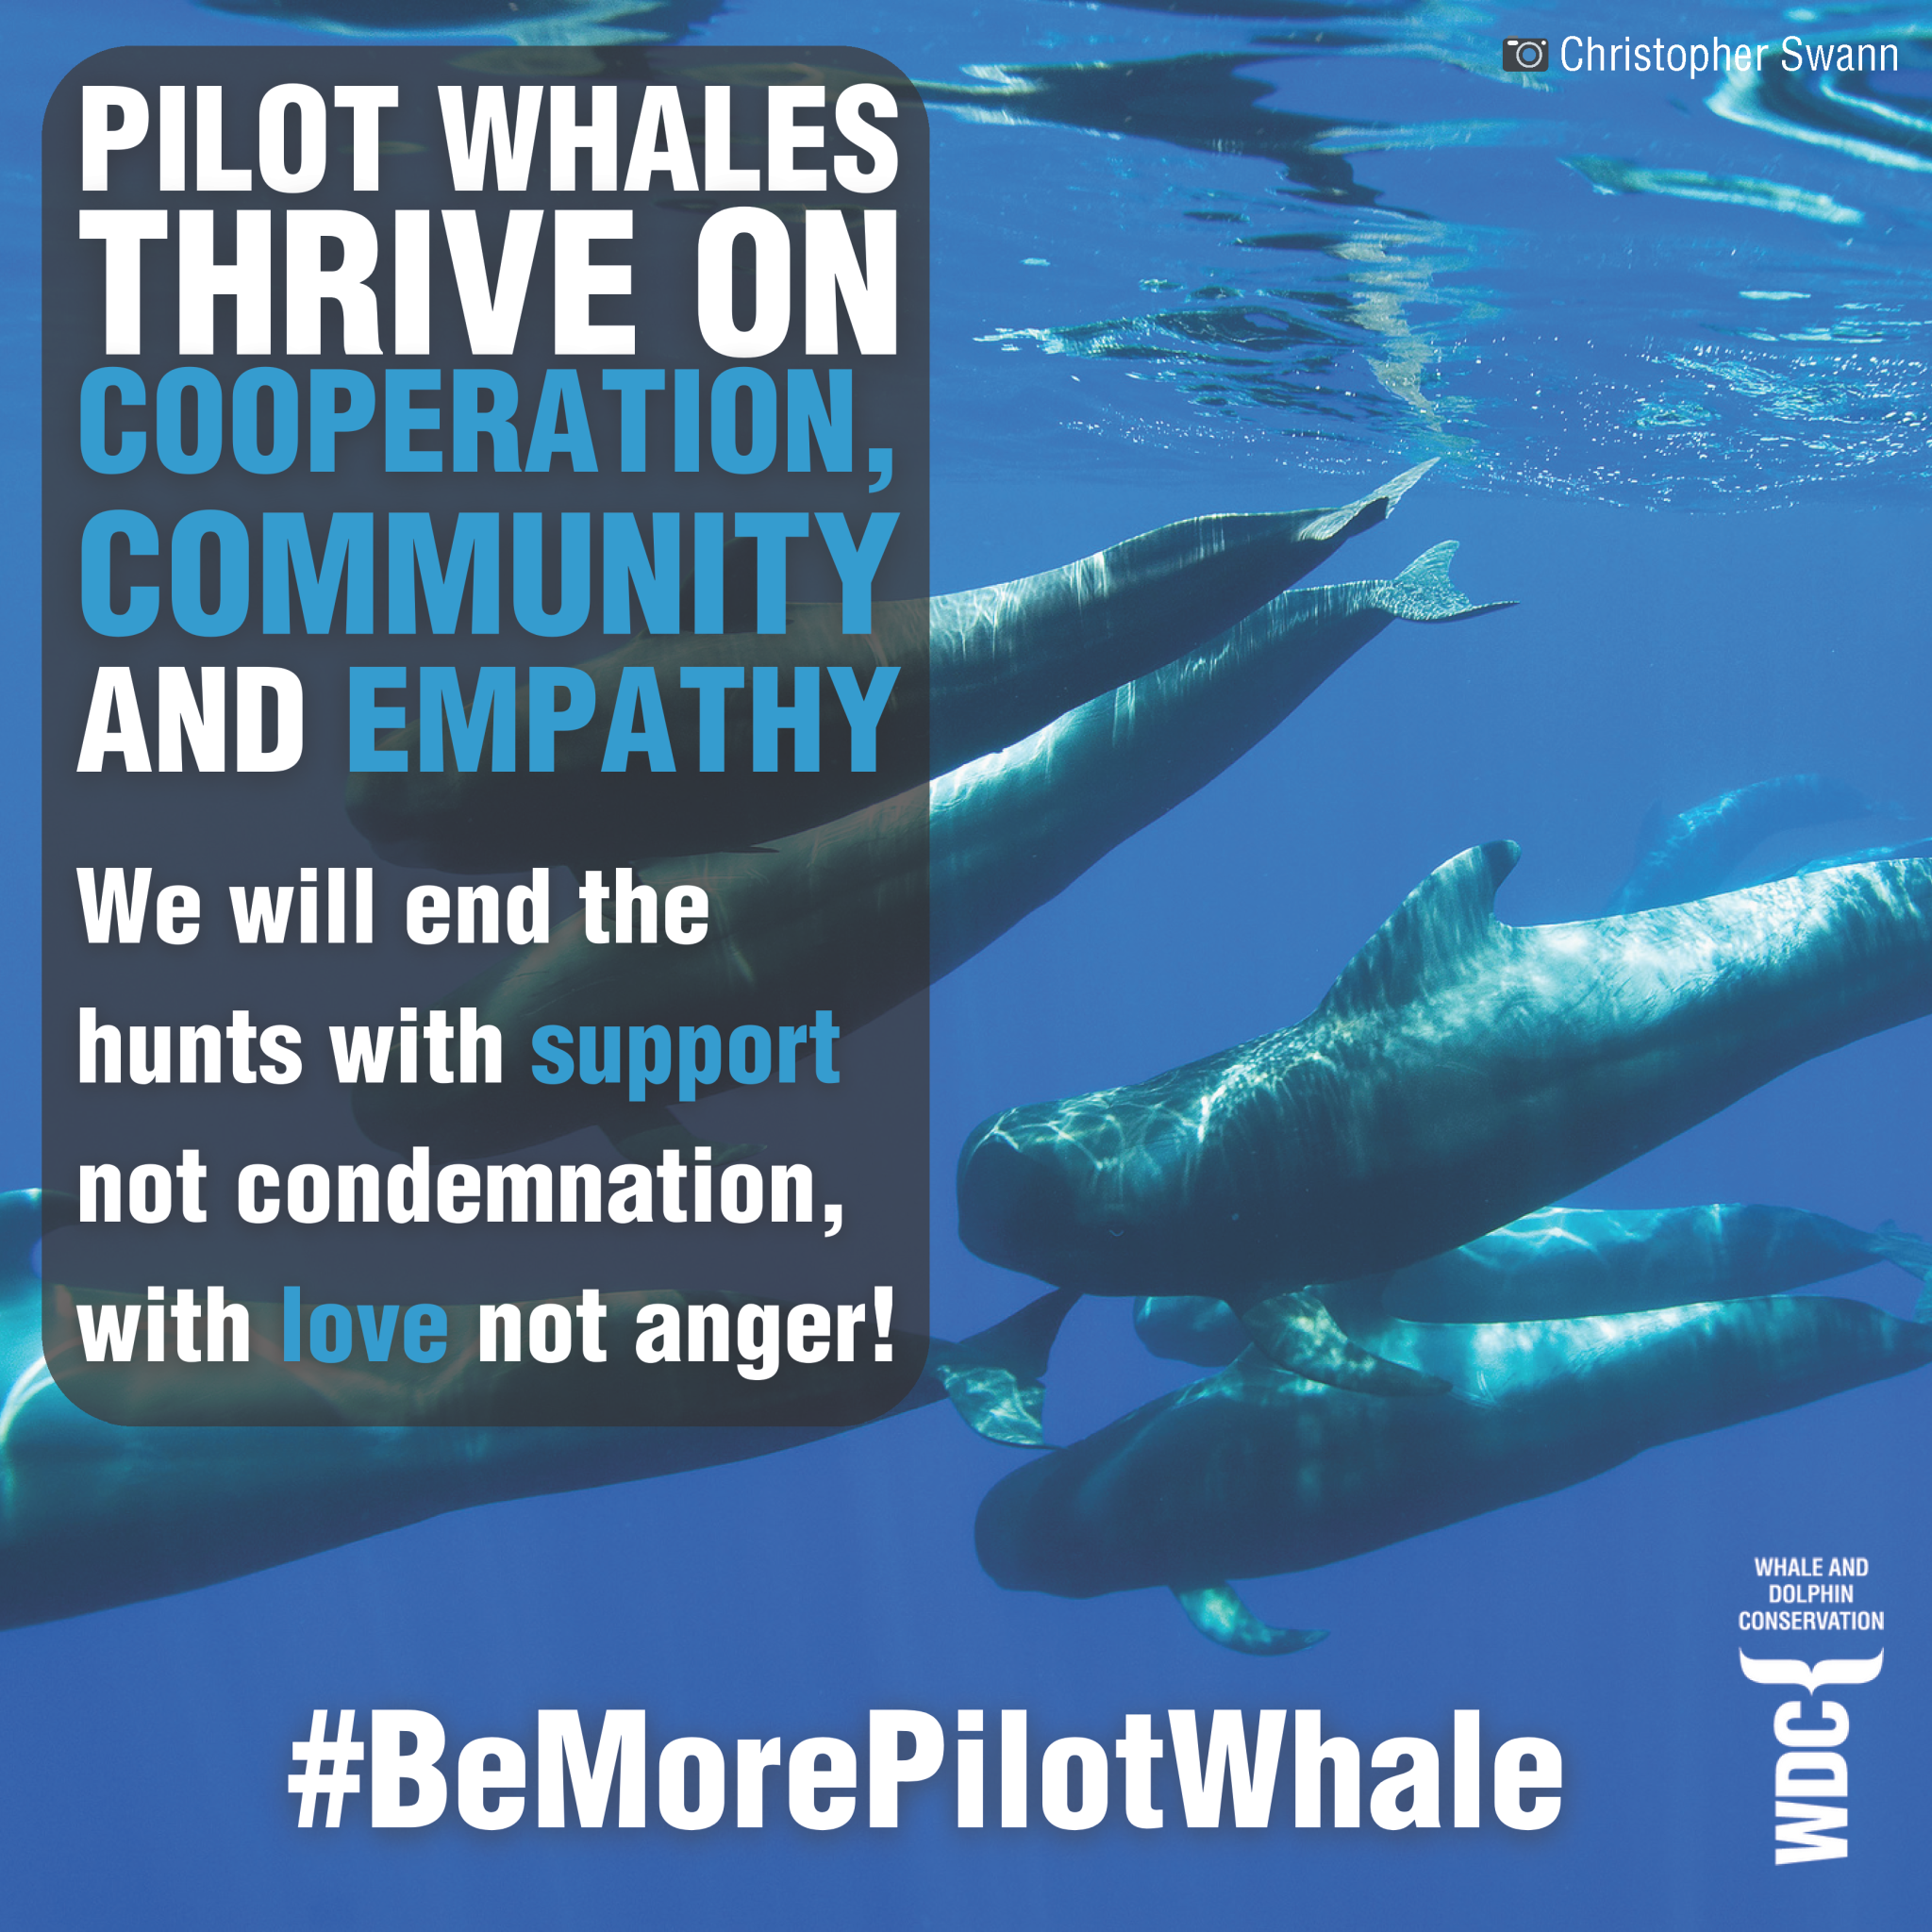 Pilot whales thrive on cooperation, community and empathy We will end the hunts with support not condemnation, with love not anger! #BeMorePilotWhale